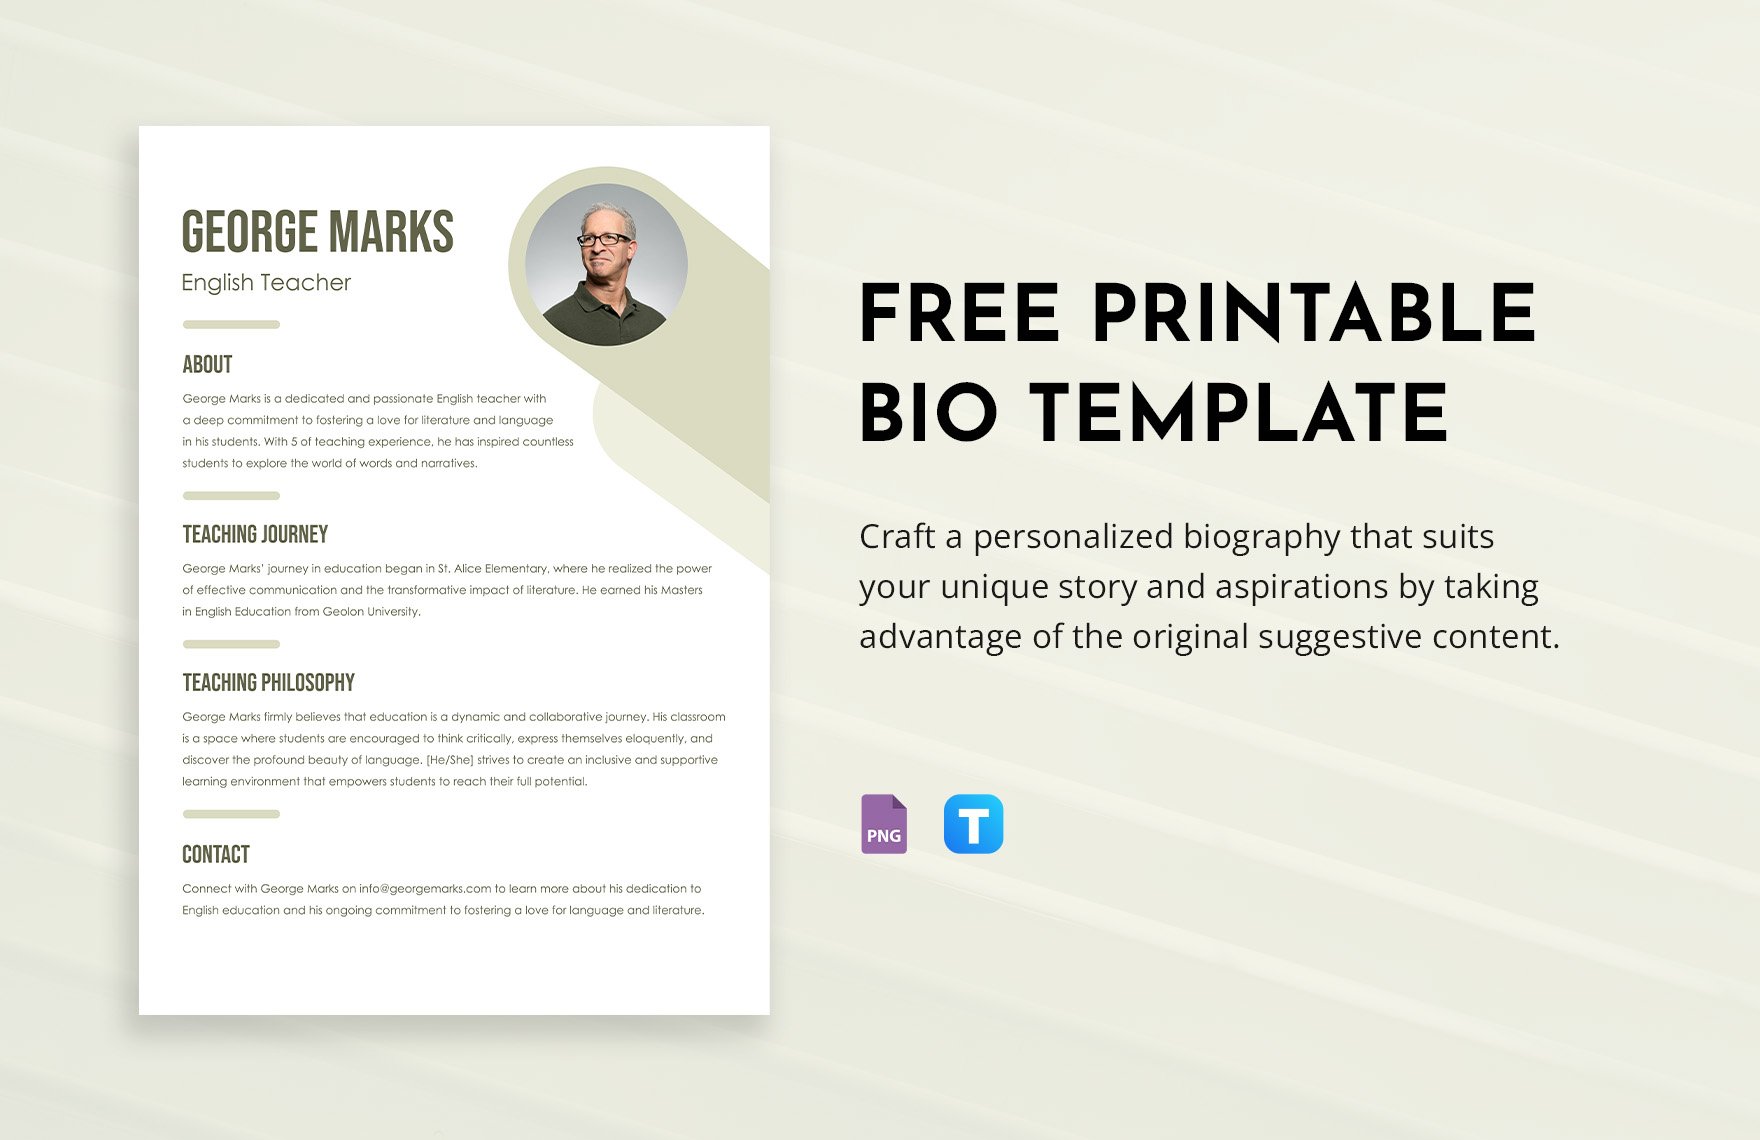 Free Printable Bio Template in PNG